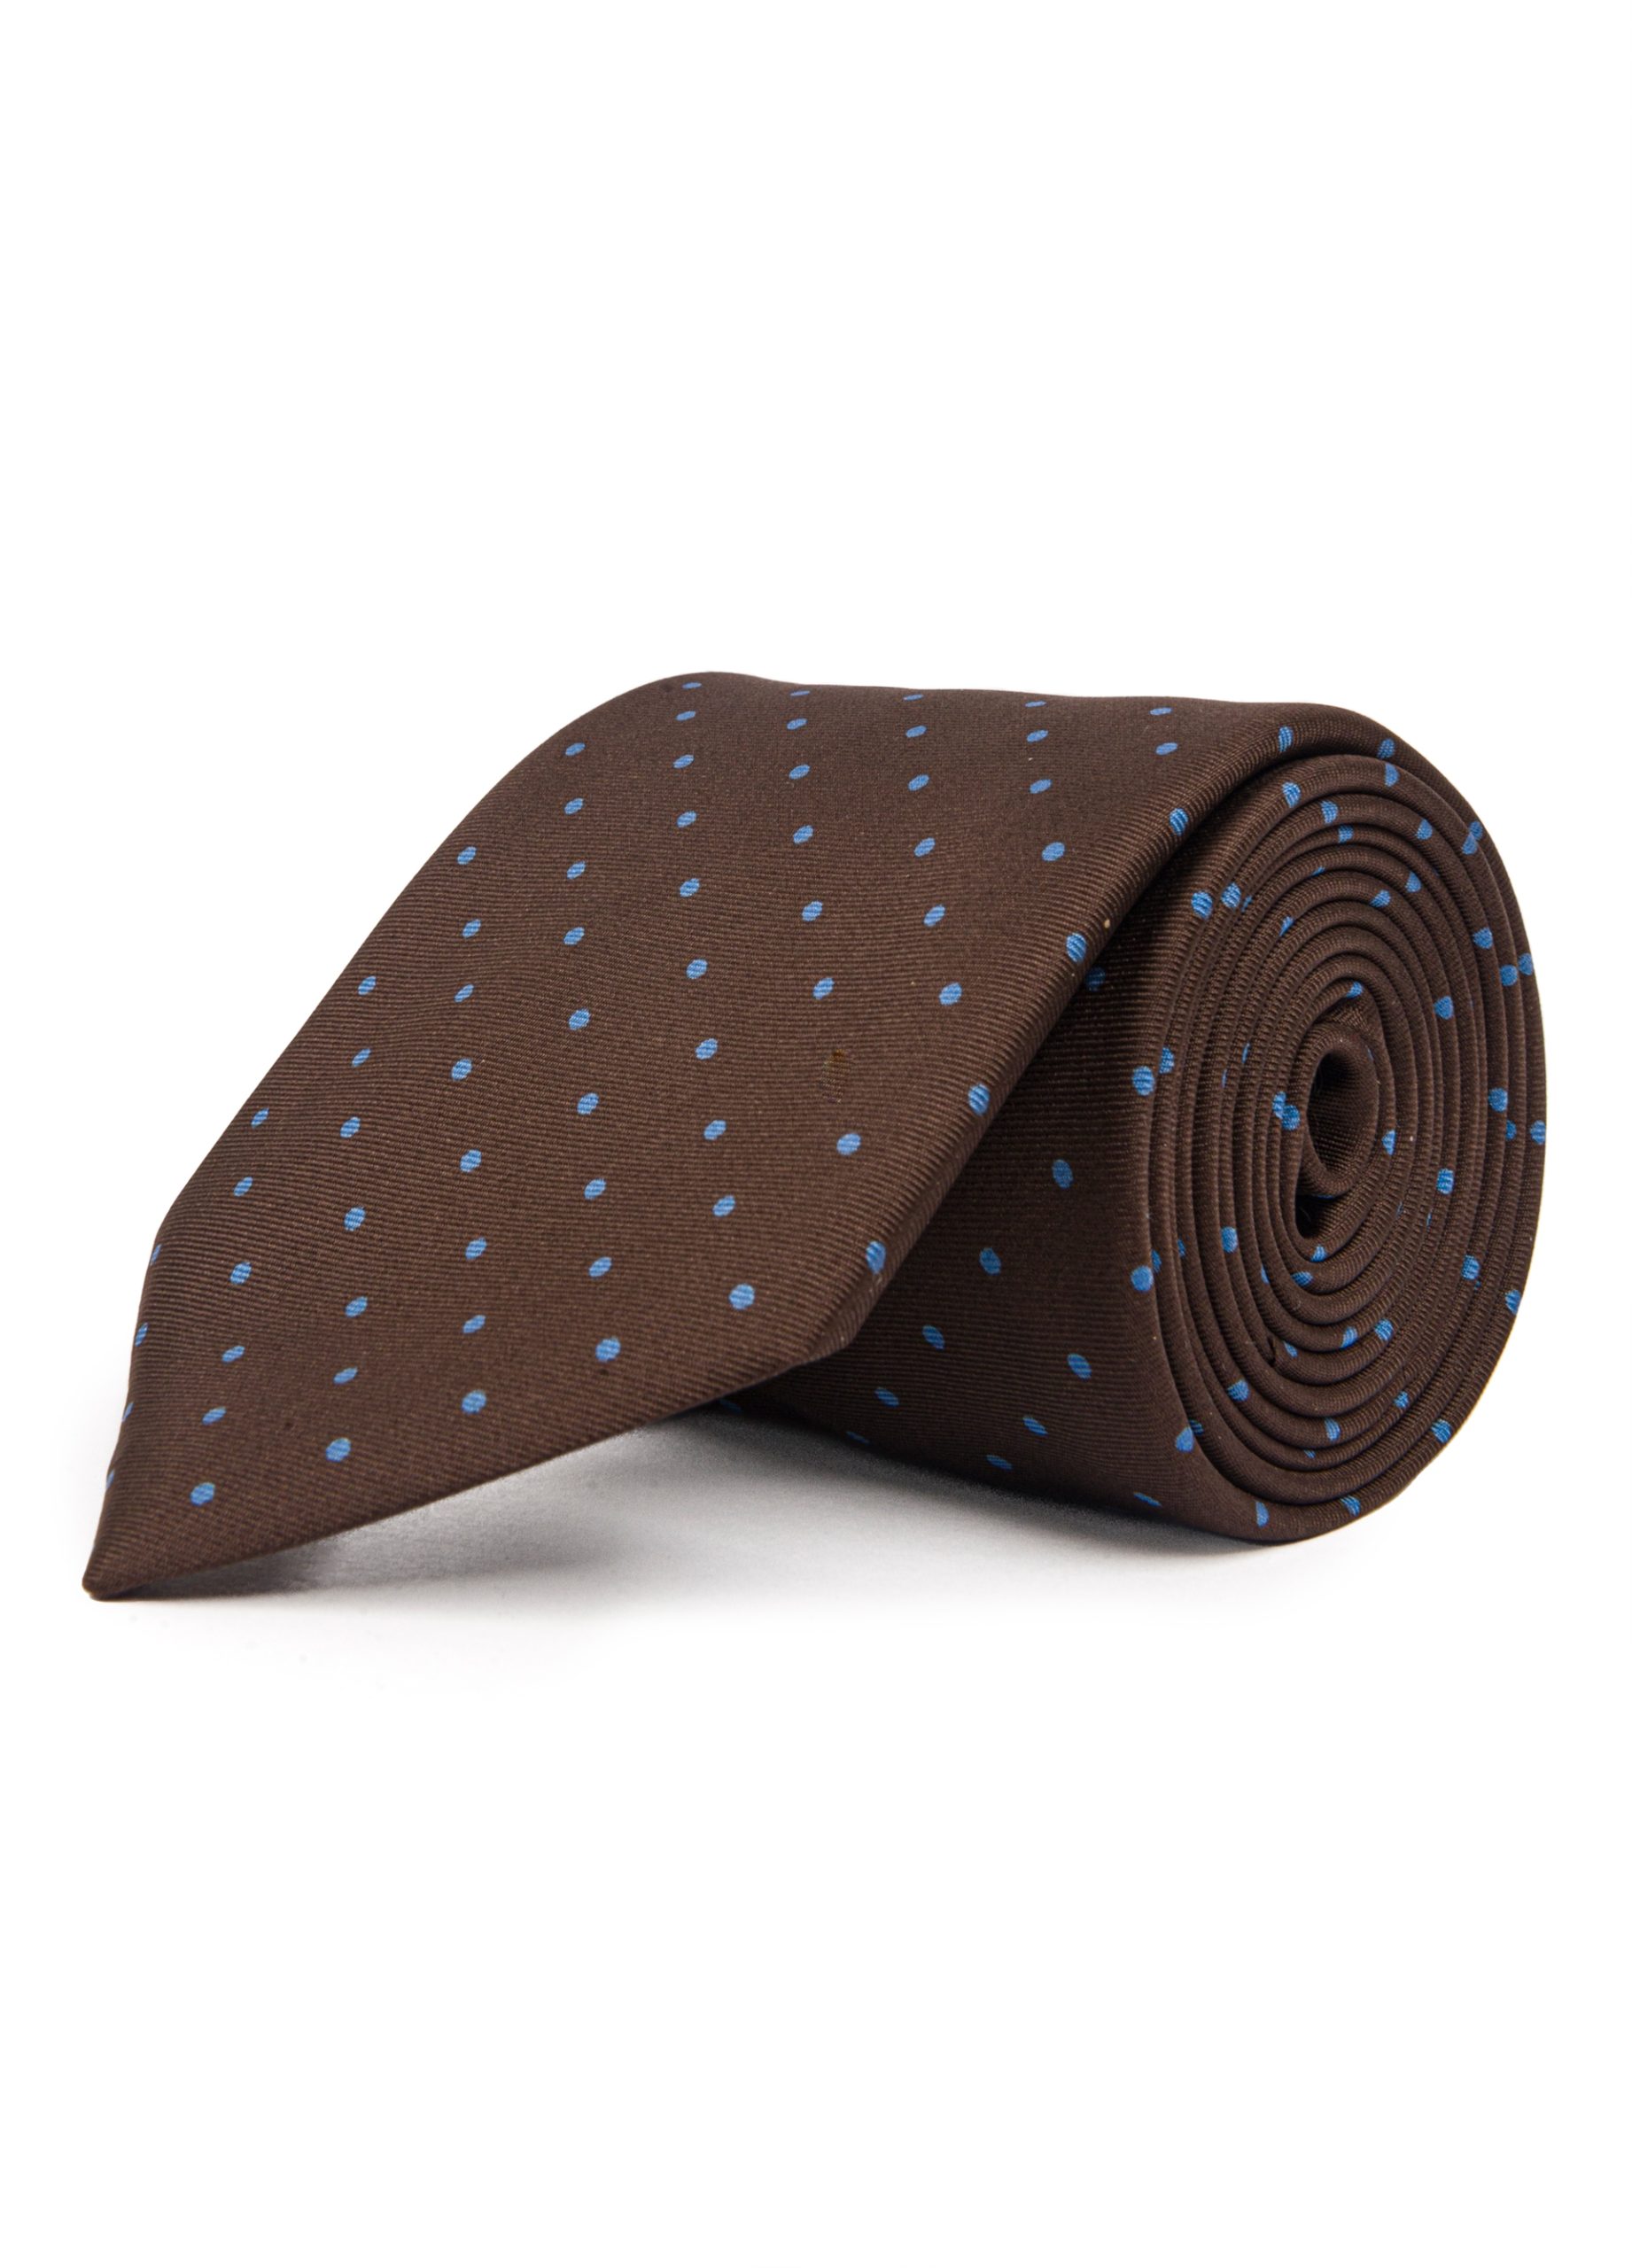 Men’s patterned tie in brown and blue